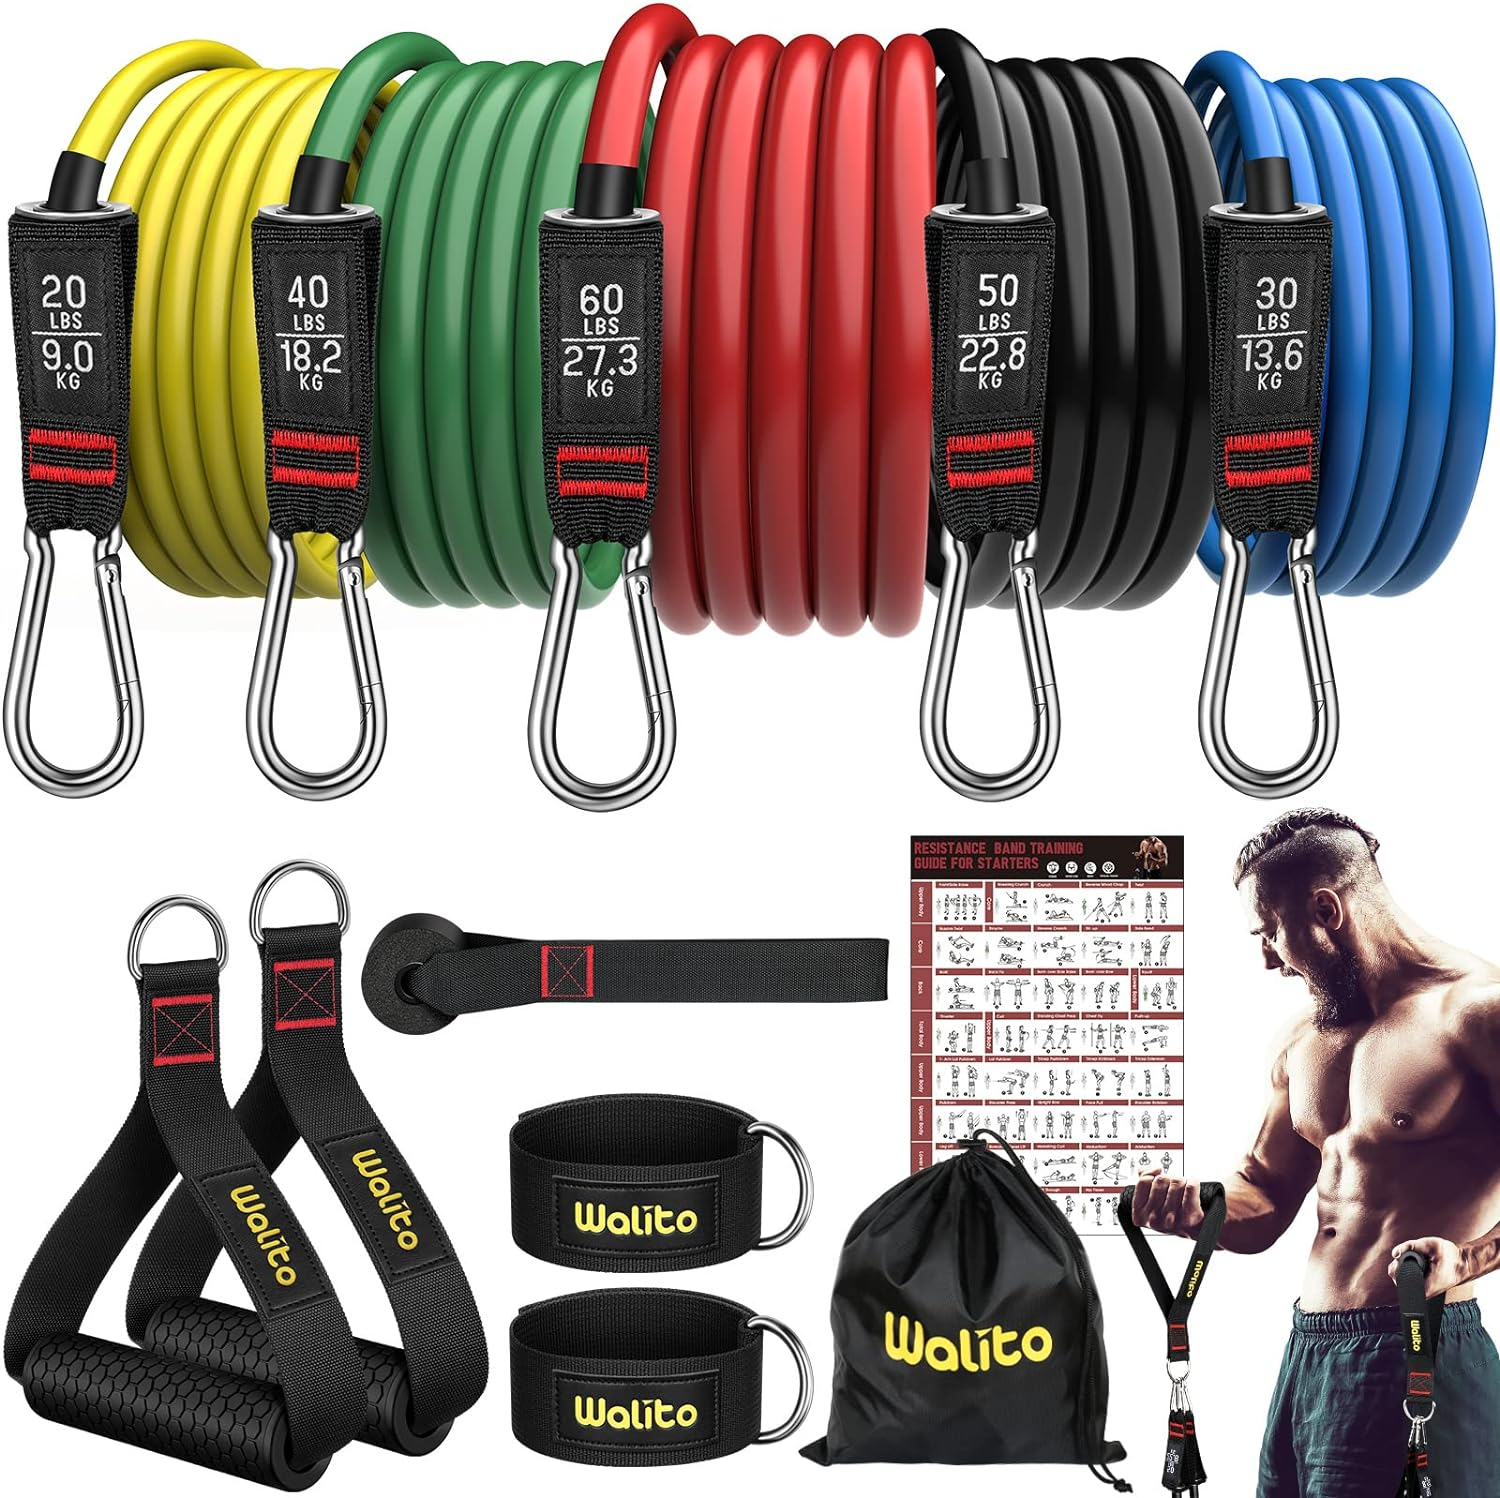 WALITO Resistance Bands Set - Exercise Bands with Handles, Door Anchor, Legs Ankle Straps, for Heavy Resistance Training, Physical Therapy, Muscle Training, Yoga, Home Workouts